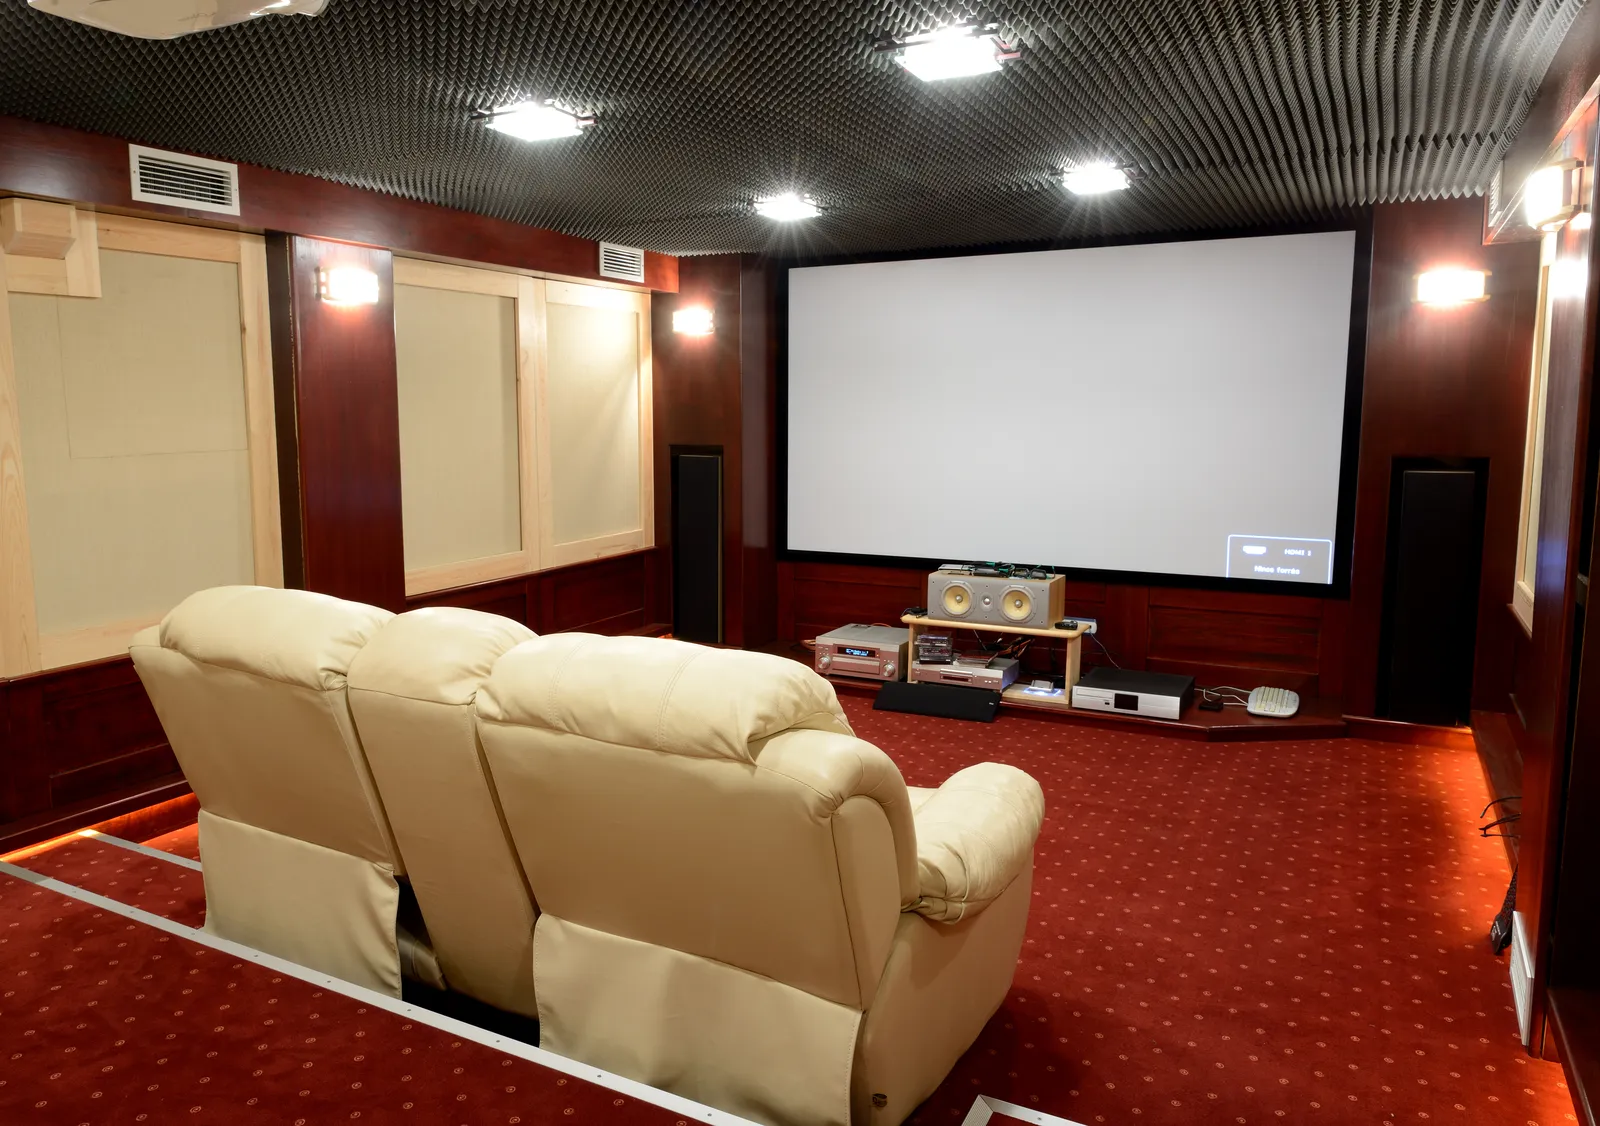 Home Theater Installation and Setup